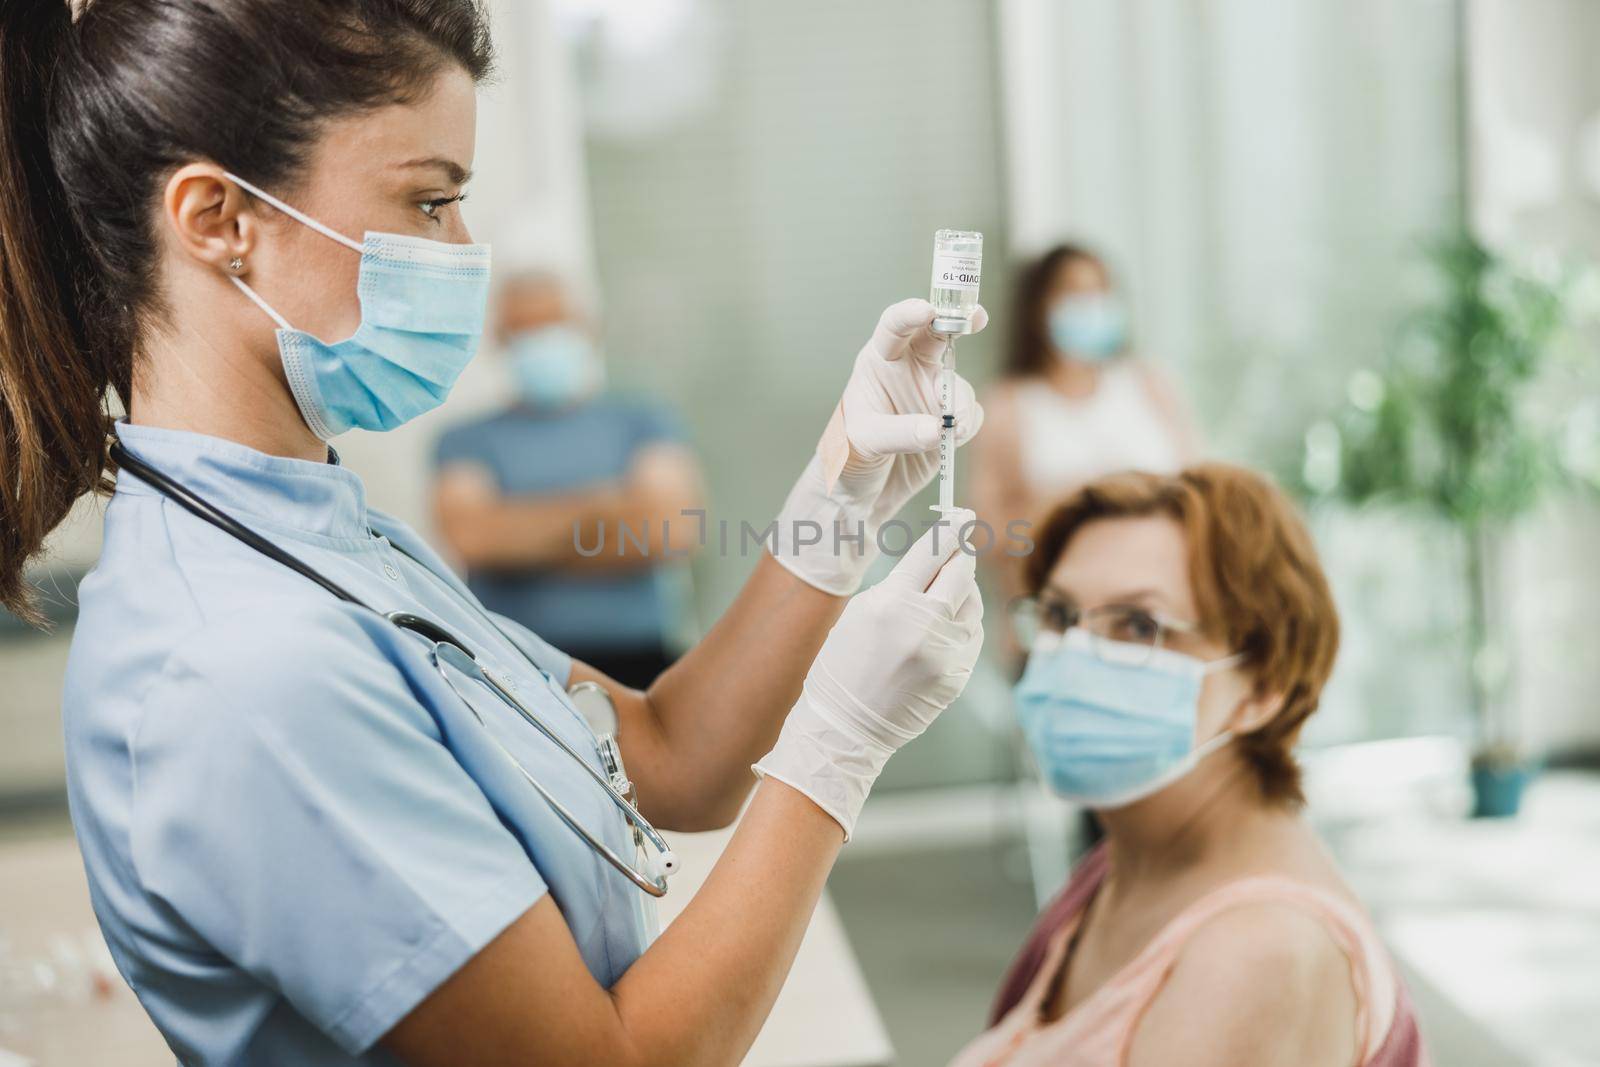 Nurse holding syringe and making Covid-19 vaccination injection dose in shoulder of female senior patient wearing mask.